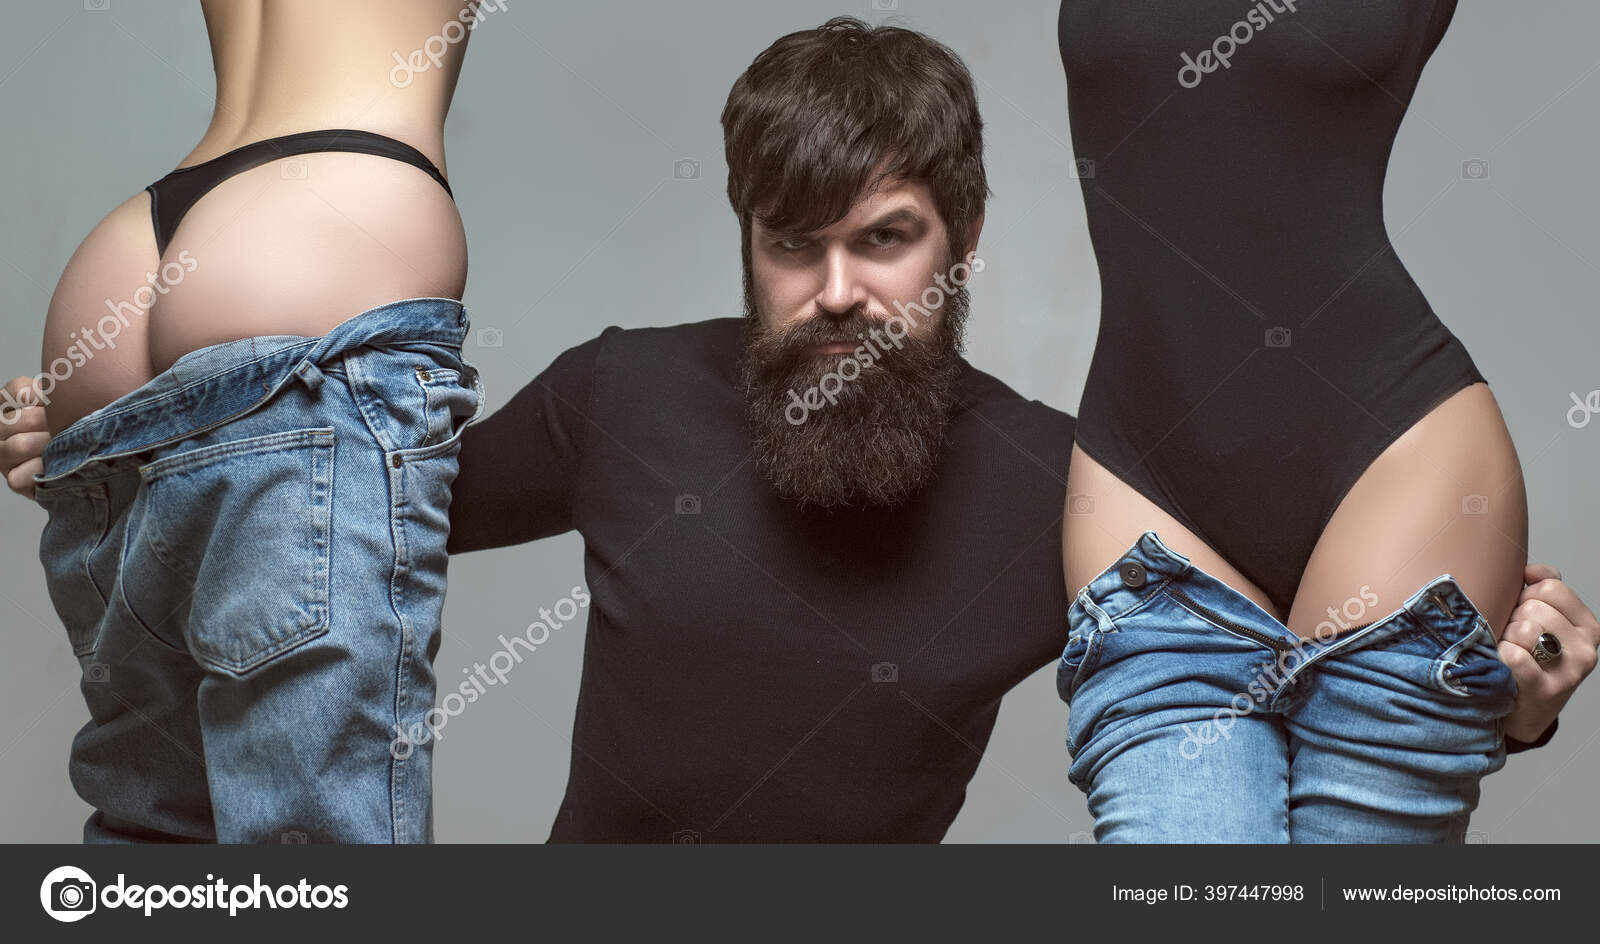 Bearded man and two sexy women. Polygamy or bigamy. Swinger, orgy or trio having sex. Bisexual lady. Prostitution or fantasy photo